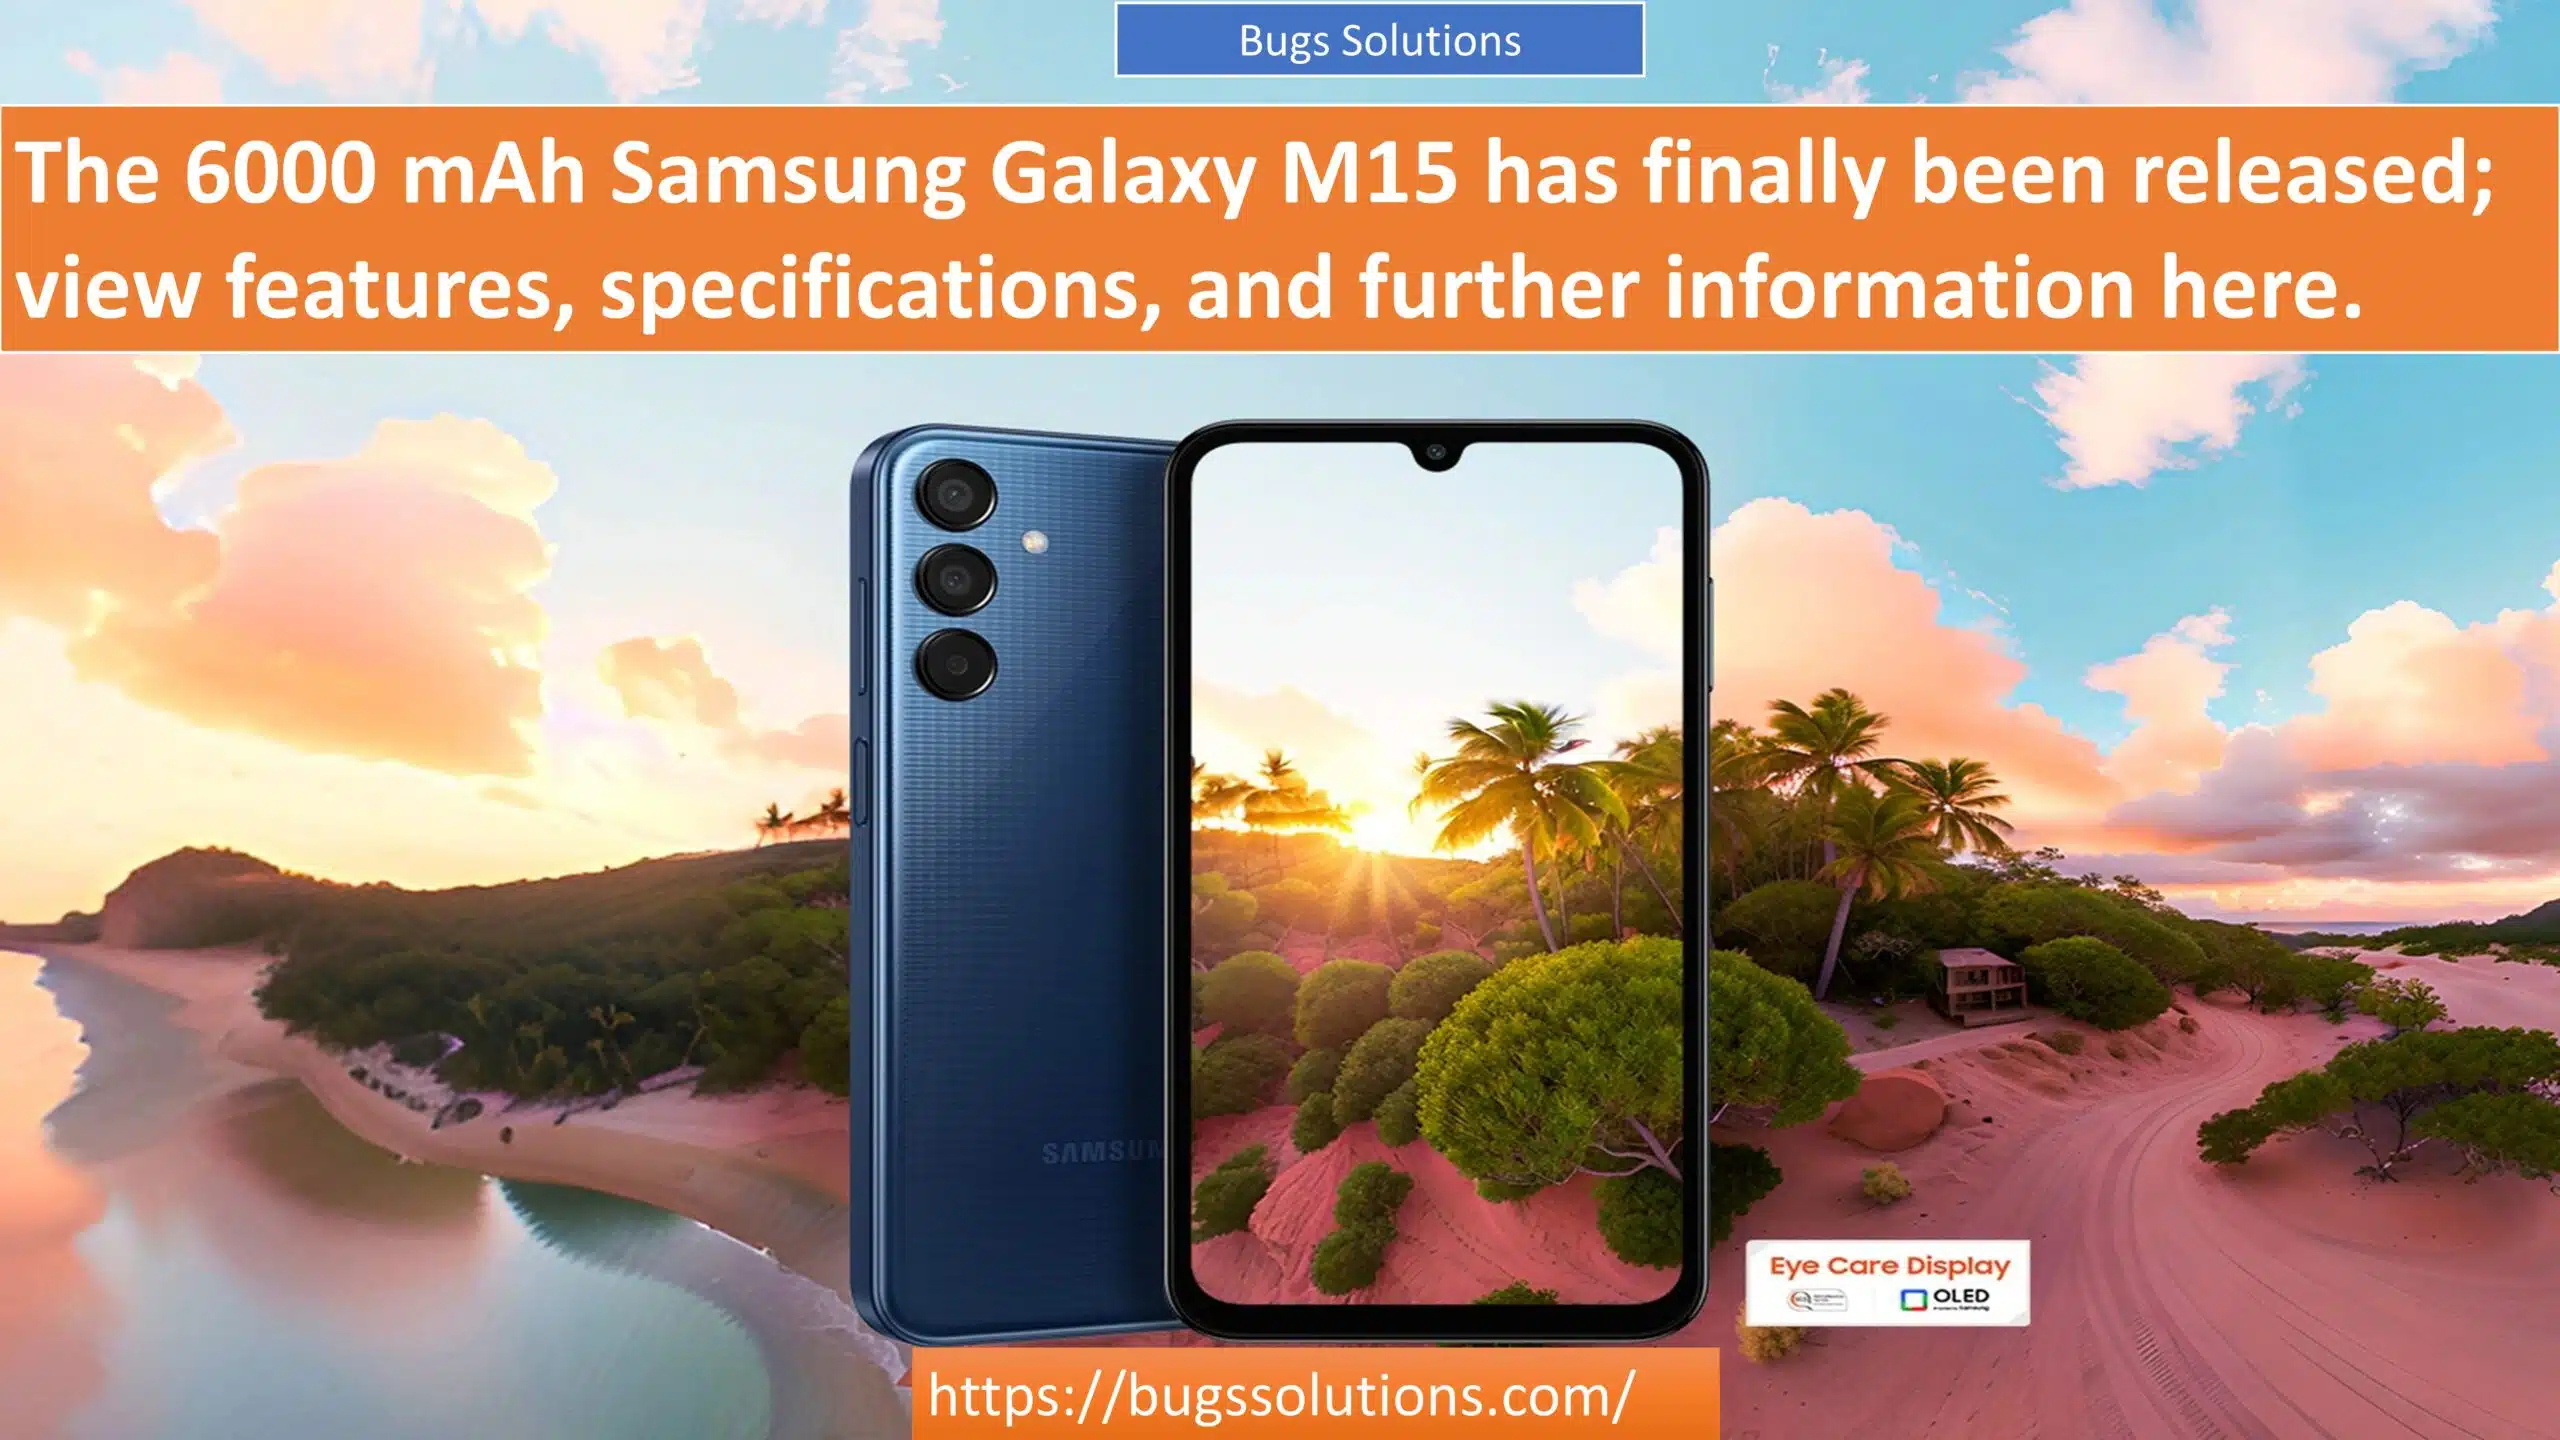 The 6000 mAh Samsung Galaxy M15 has finally been released; view features, specifications, and further information here.